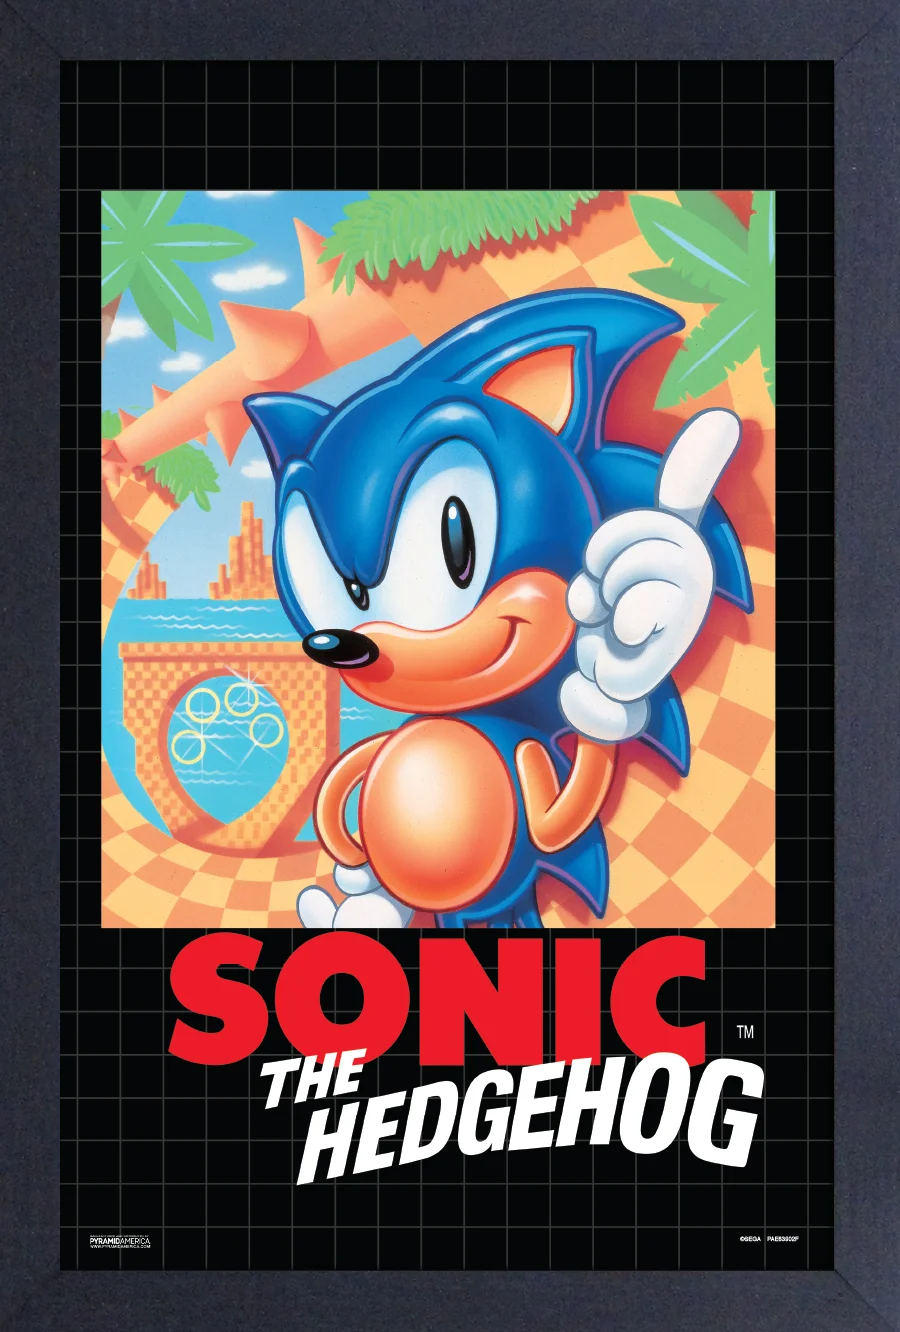 Sonic the Hedgehog - Sonic the Hedgehog Cover (11"x17" Gel-Coat) (Order in multiples of 6, mix and match styles)